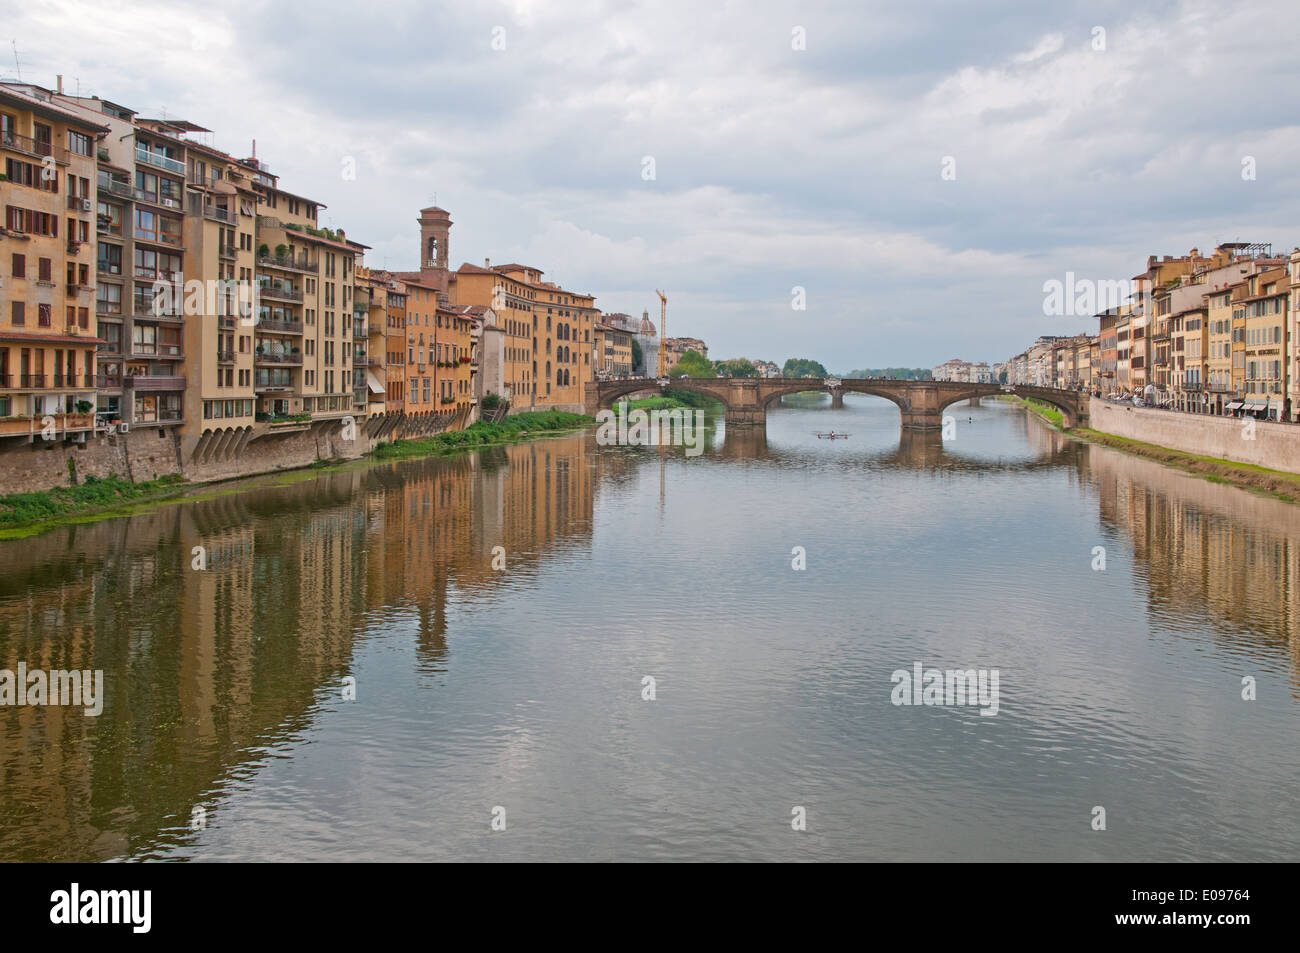 Looking west down the River Arno from the Ponte Vecchio in Florence Italy Stock Photo